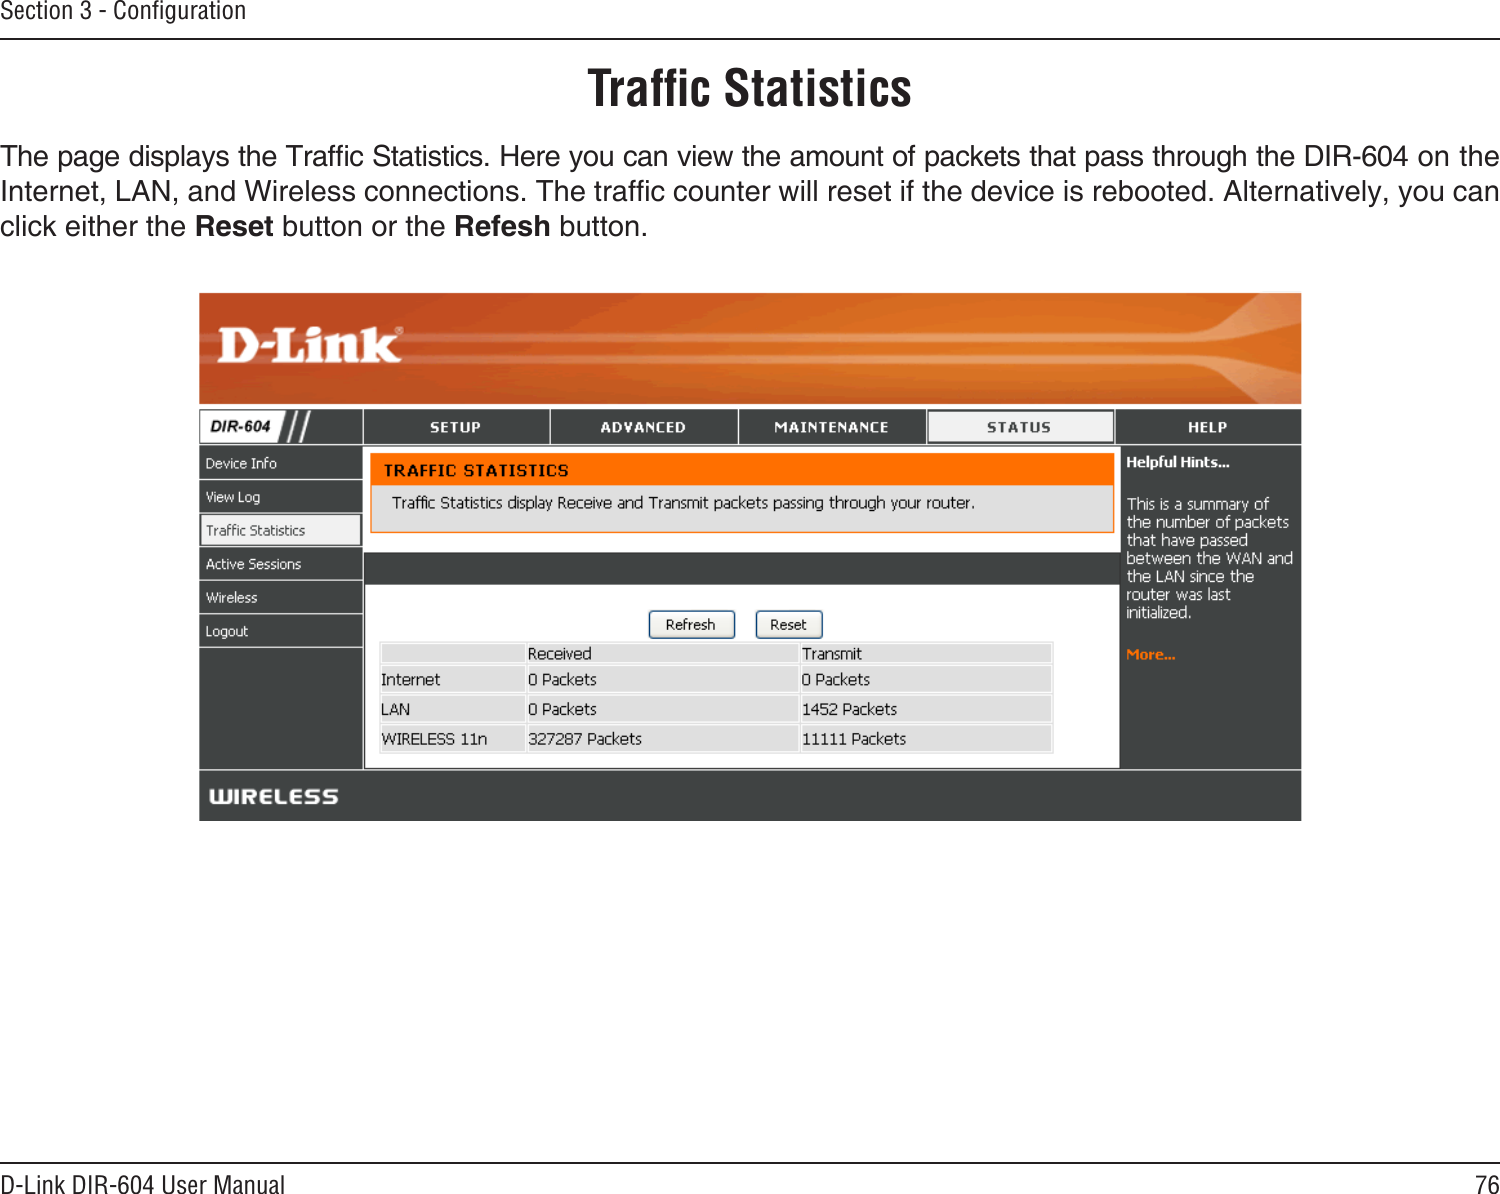 76D-Link DIR-604 User ManualSection 3 - ConﬁgurationTrafﬁc StatisticsThe page displays the Trafc Statistics. Here you can view the amount of packets that pass through the DIR-604 on the Internet, LAN, and Wireless connections. The trafc counter will reset if the device is rebooted. Alternatively, you can click either the Reset button or the Refesh button.